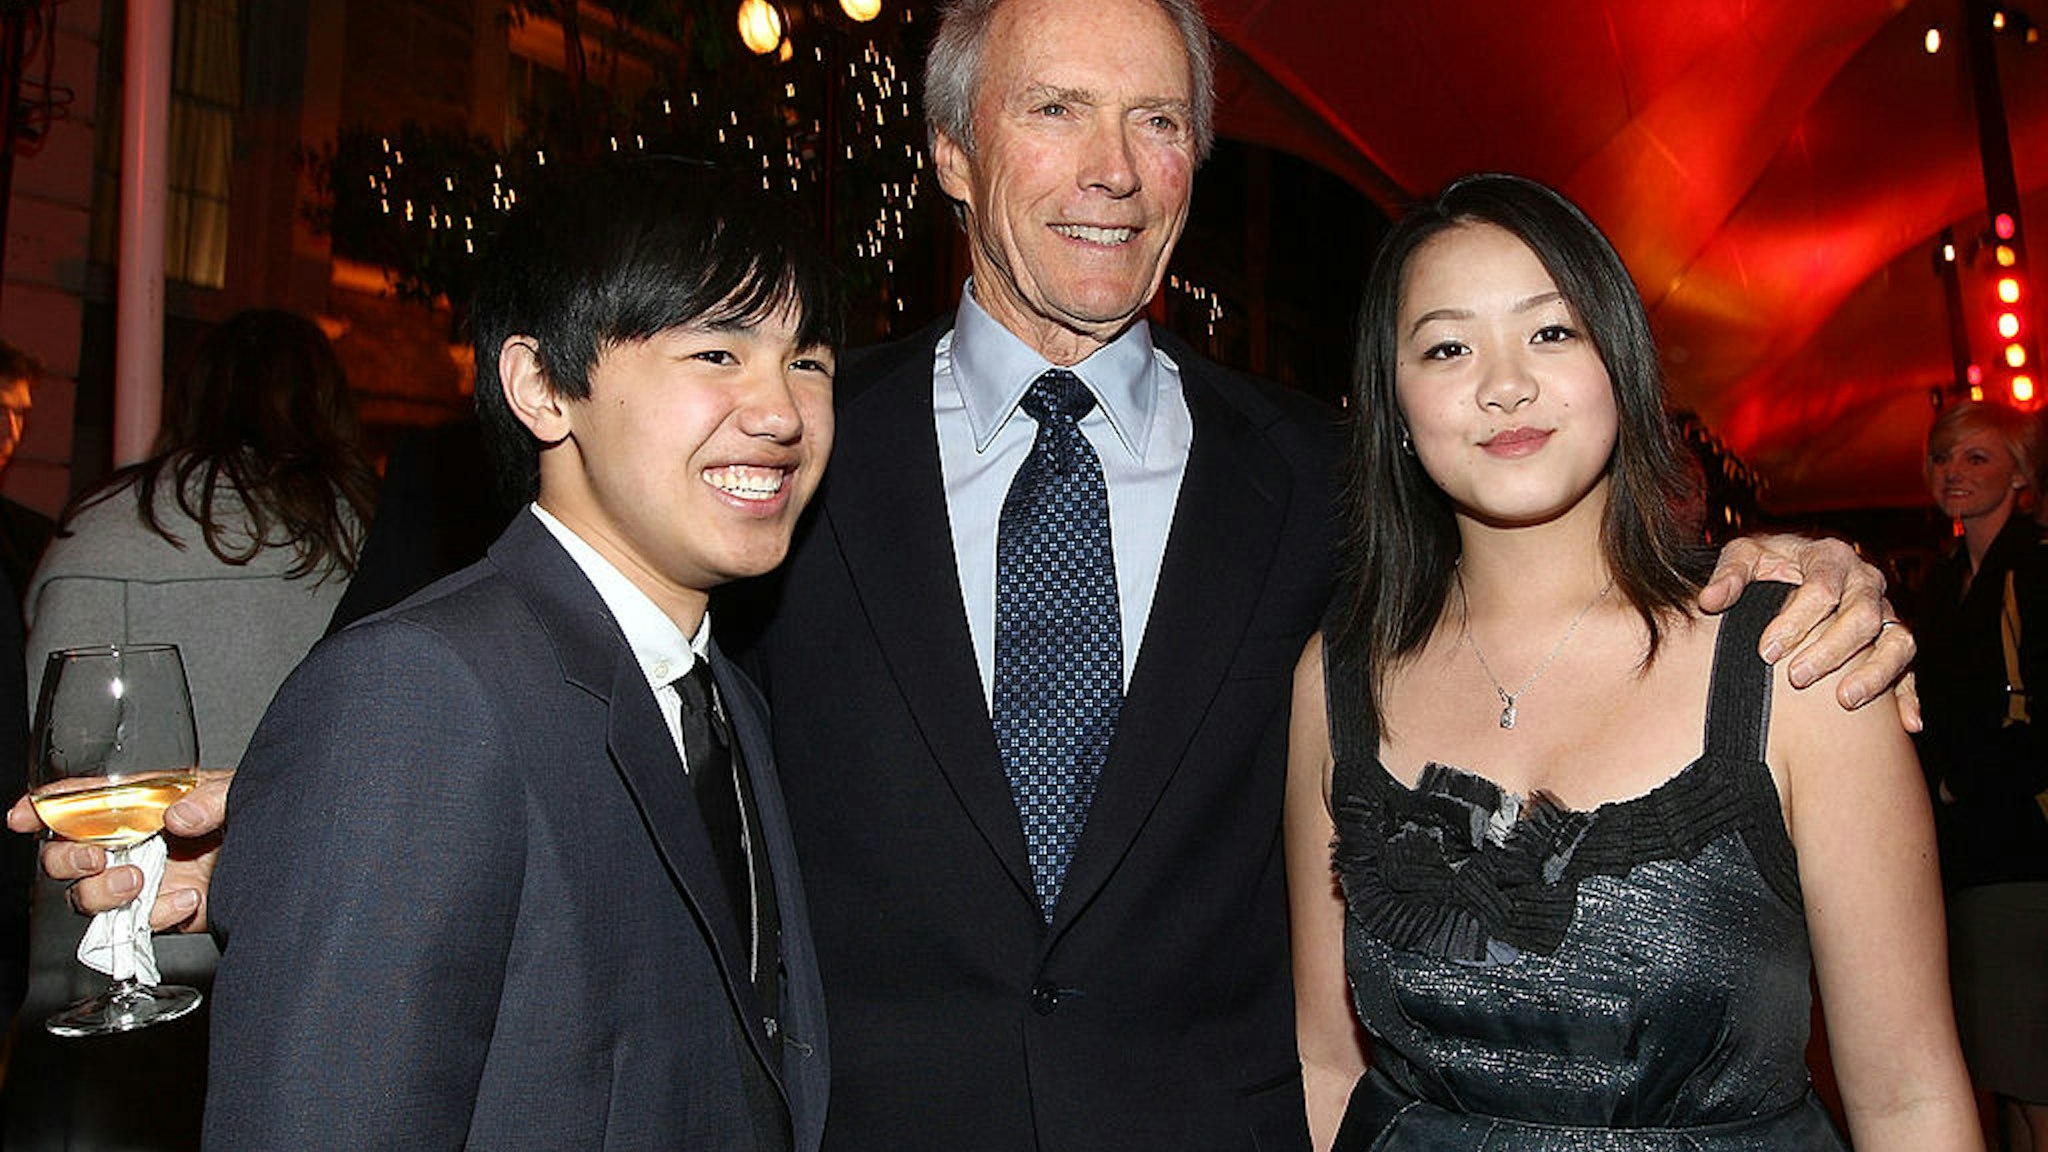 BURBANK, CA - DECEMBER 09: Actor Bee Vang, director Clint Eastwood and actress Ahney Her attend the after party for the world premiere of Warner Bros. Pictures' "Gran Torino" held at Warner Bros. Studios on December 9, 2008 in Burbank, California. (Photo by Alberto E. Rodriguez/Getty Images)